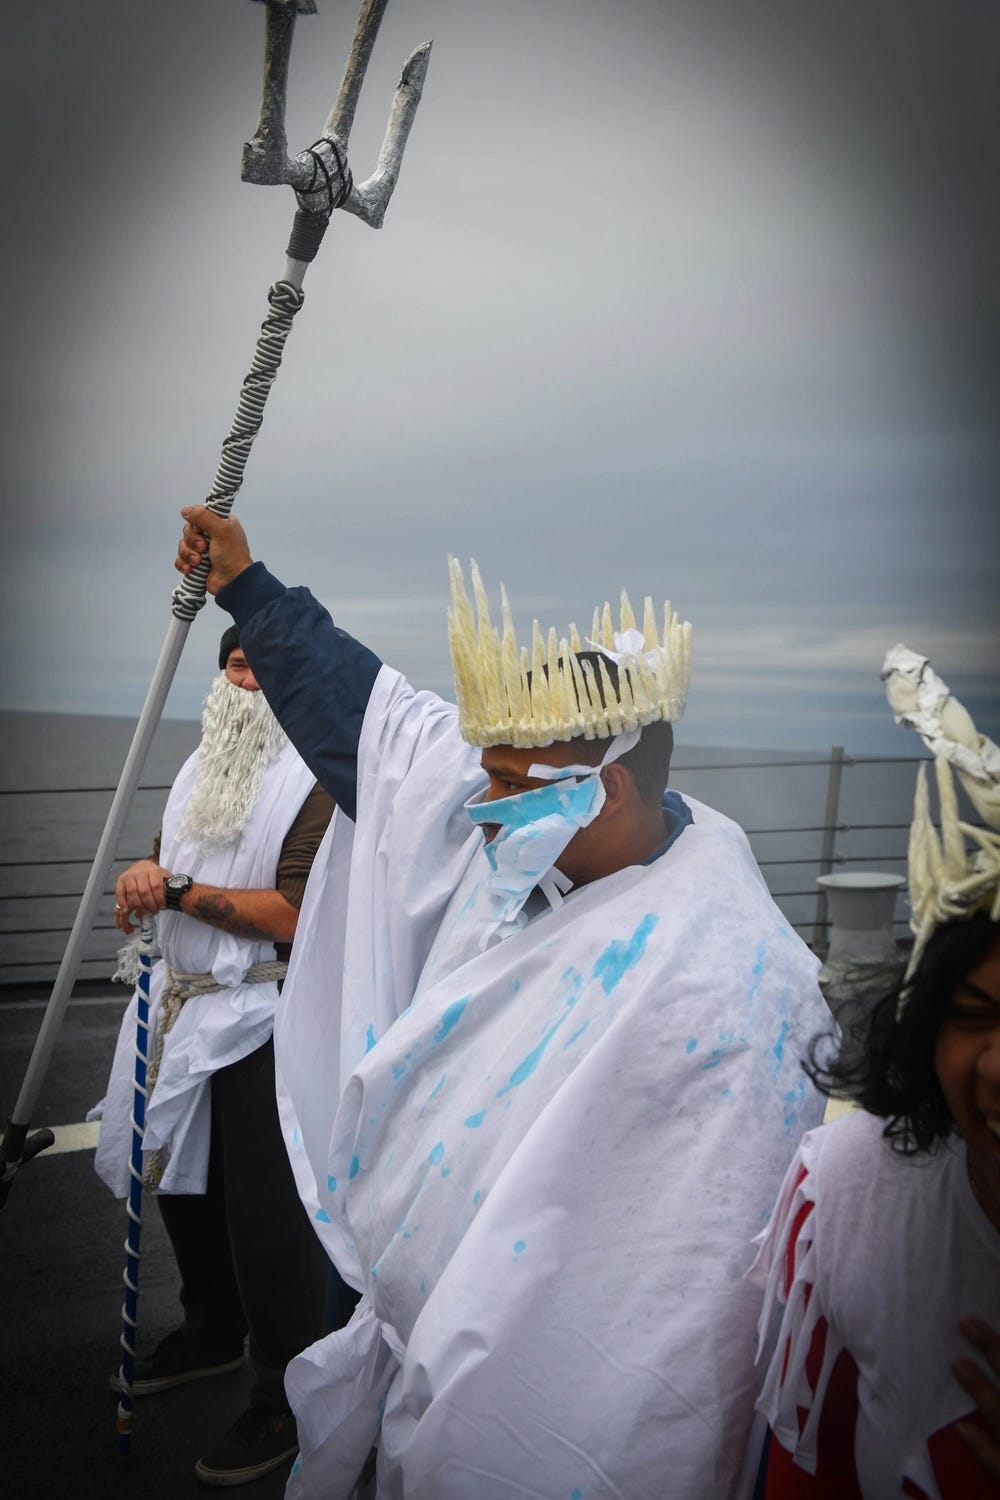 <p><span>Because there is no formalized ceremony or certificate, the actual Blue Nose ceremony can vary from ship to ship. However, there are some commonalities among them.</span></p><p><span>All ceremonies include a visit from Boreas Rex, the King of the North whose domain the sailors enter upon crossing the Arctic Circle. To be accepted into his realm, sailors must go through a series of challenges designed by captains and crews.</span></p>